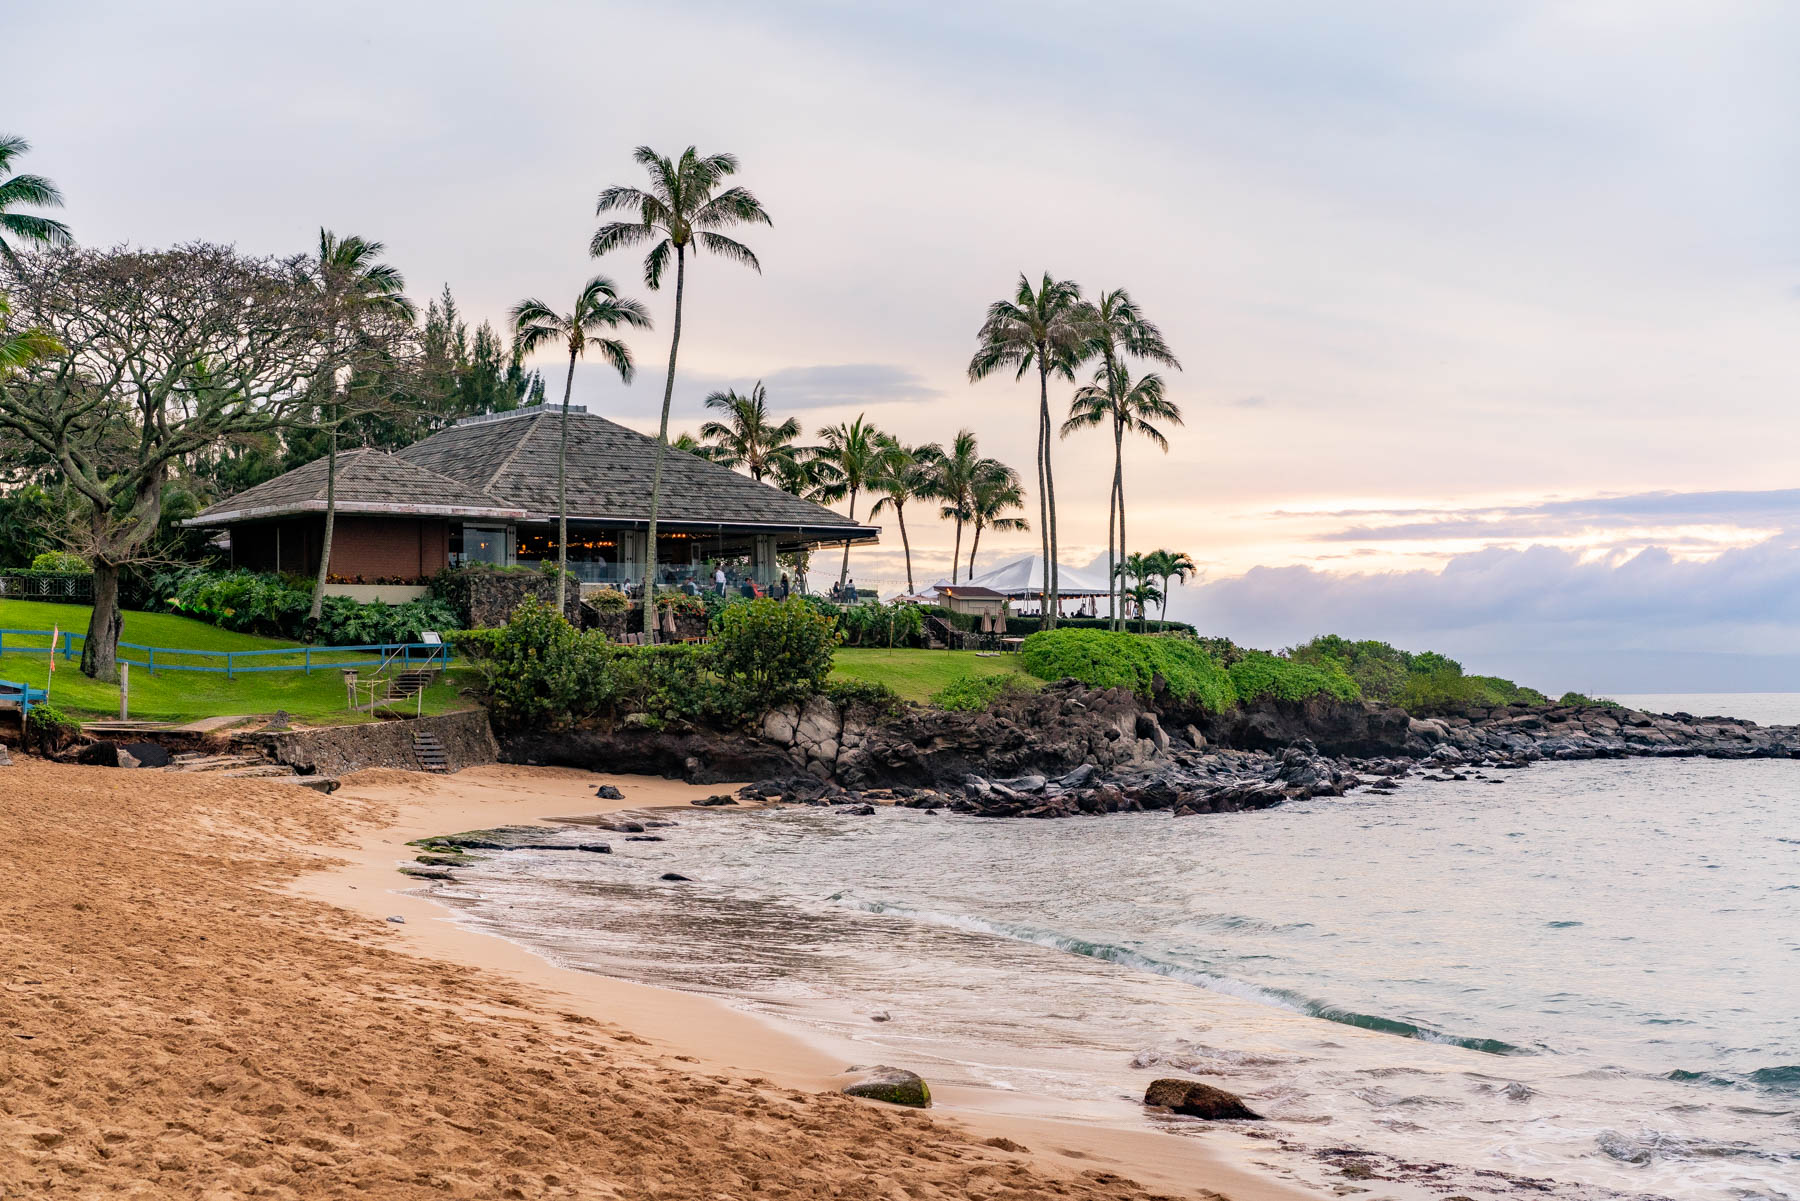 Pros and cons of living in Hawaii